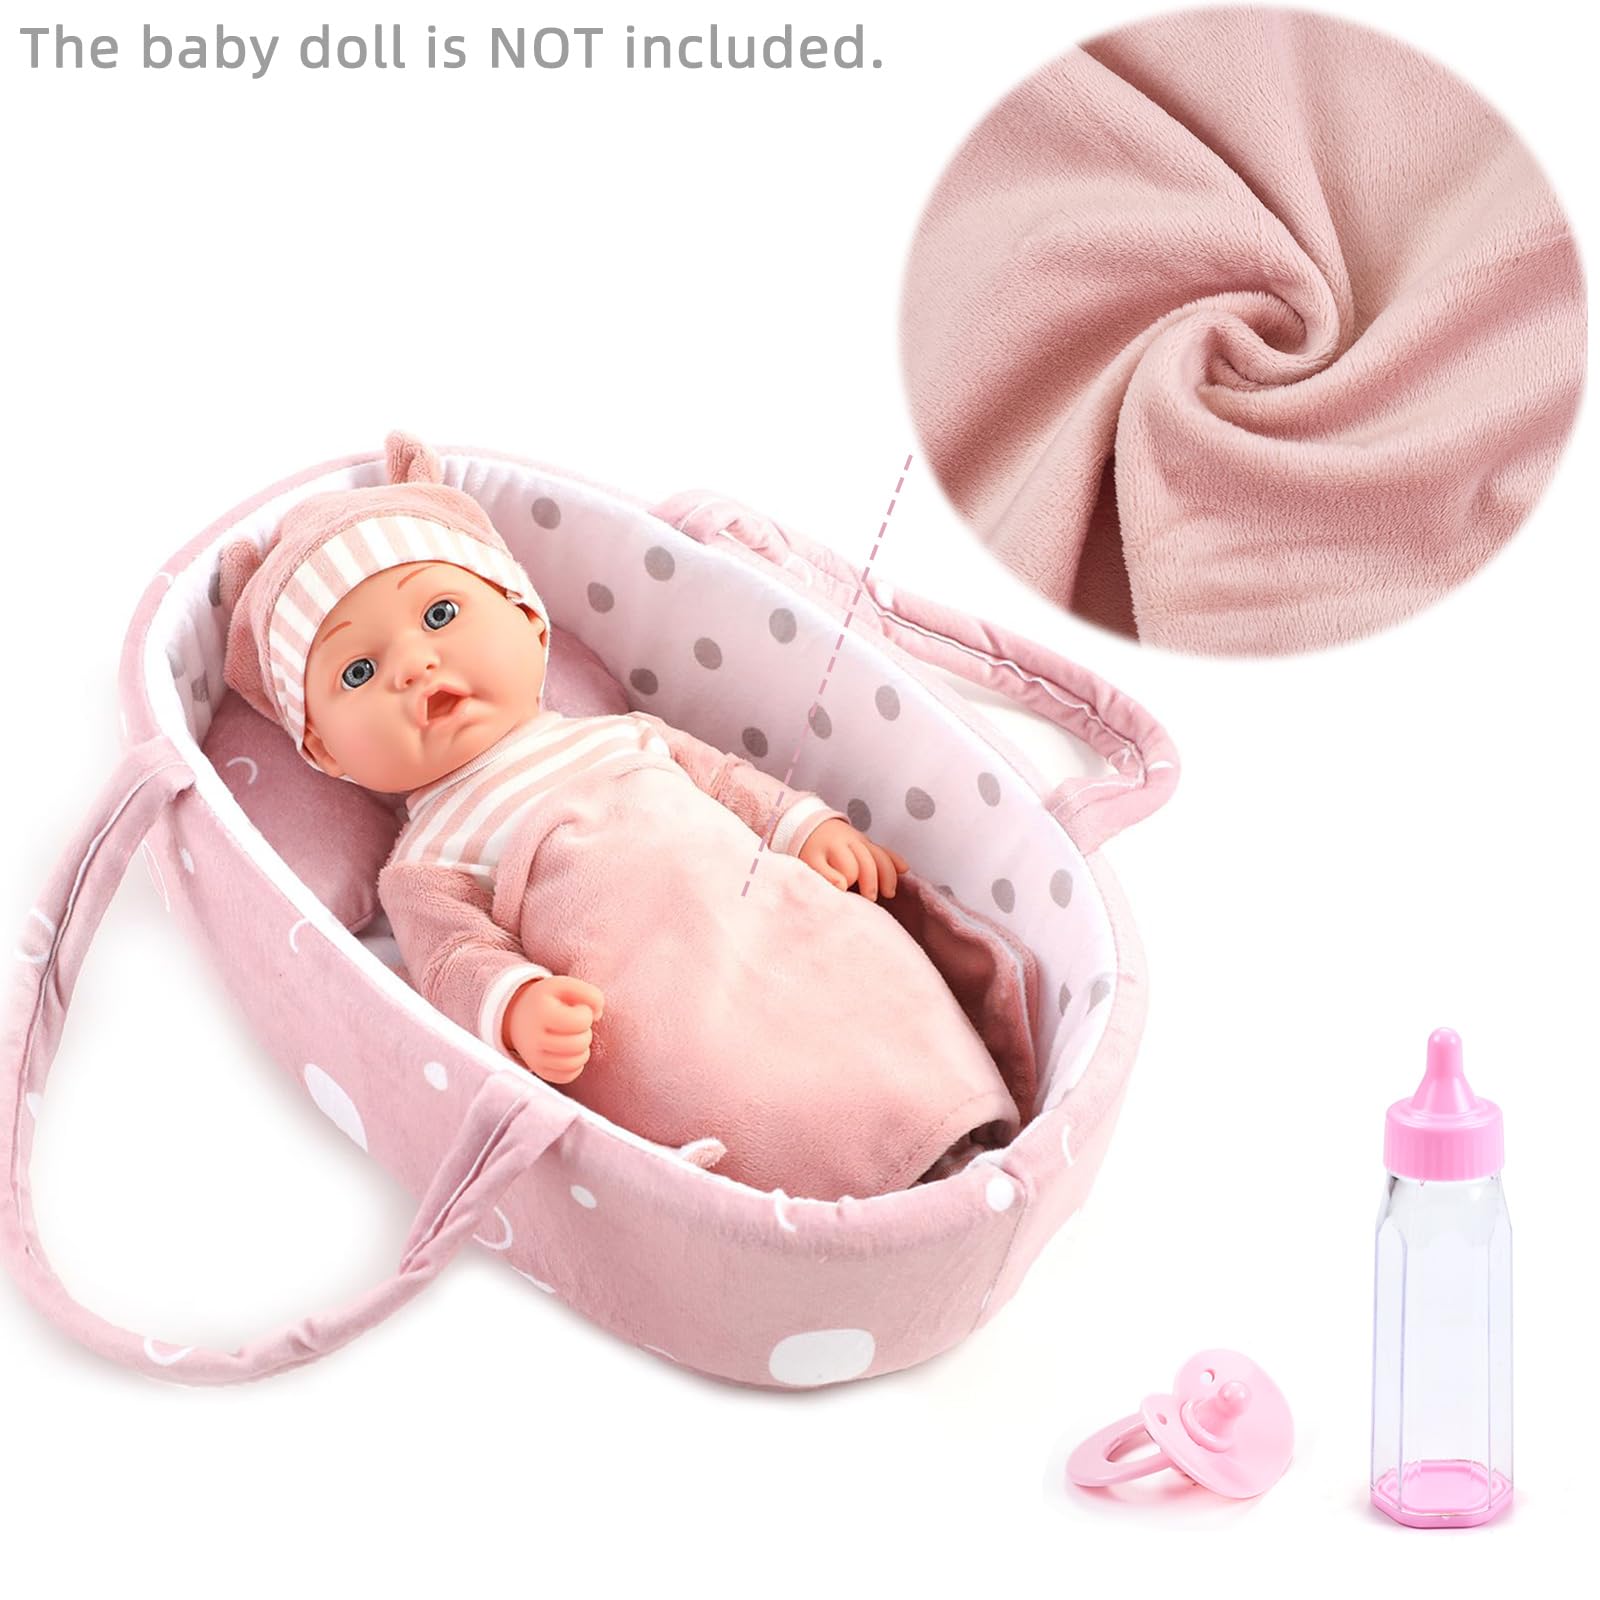 Enjoyin 8 Pcs Baby Doll Accessories Set Includes Feeding Bottle, Pacifier, Blanket, Pillow, Tablewares and Bassinet Carrier for 9'' to 12'' Dolls